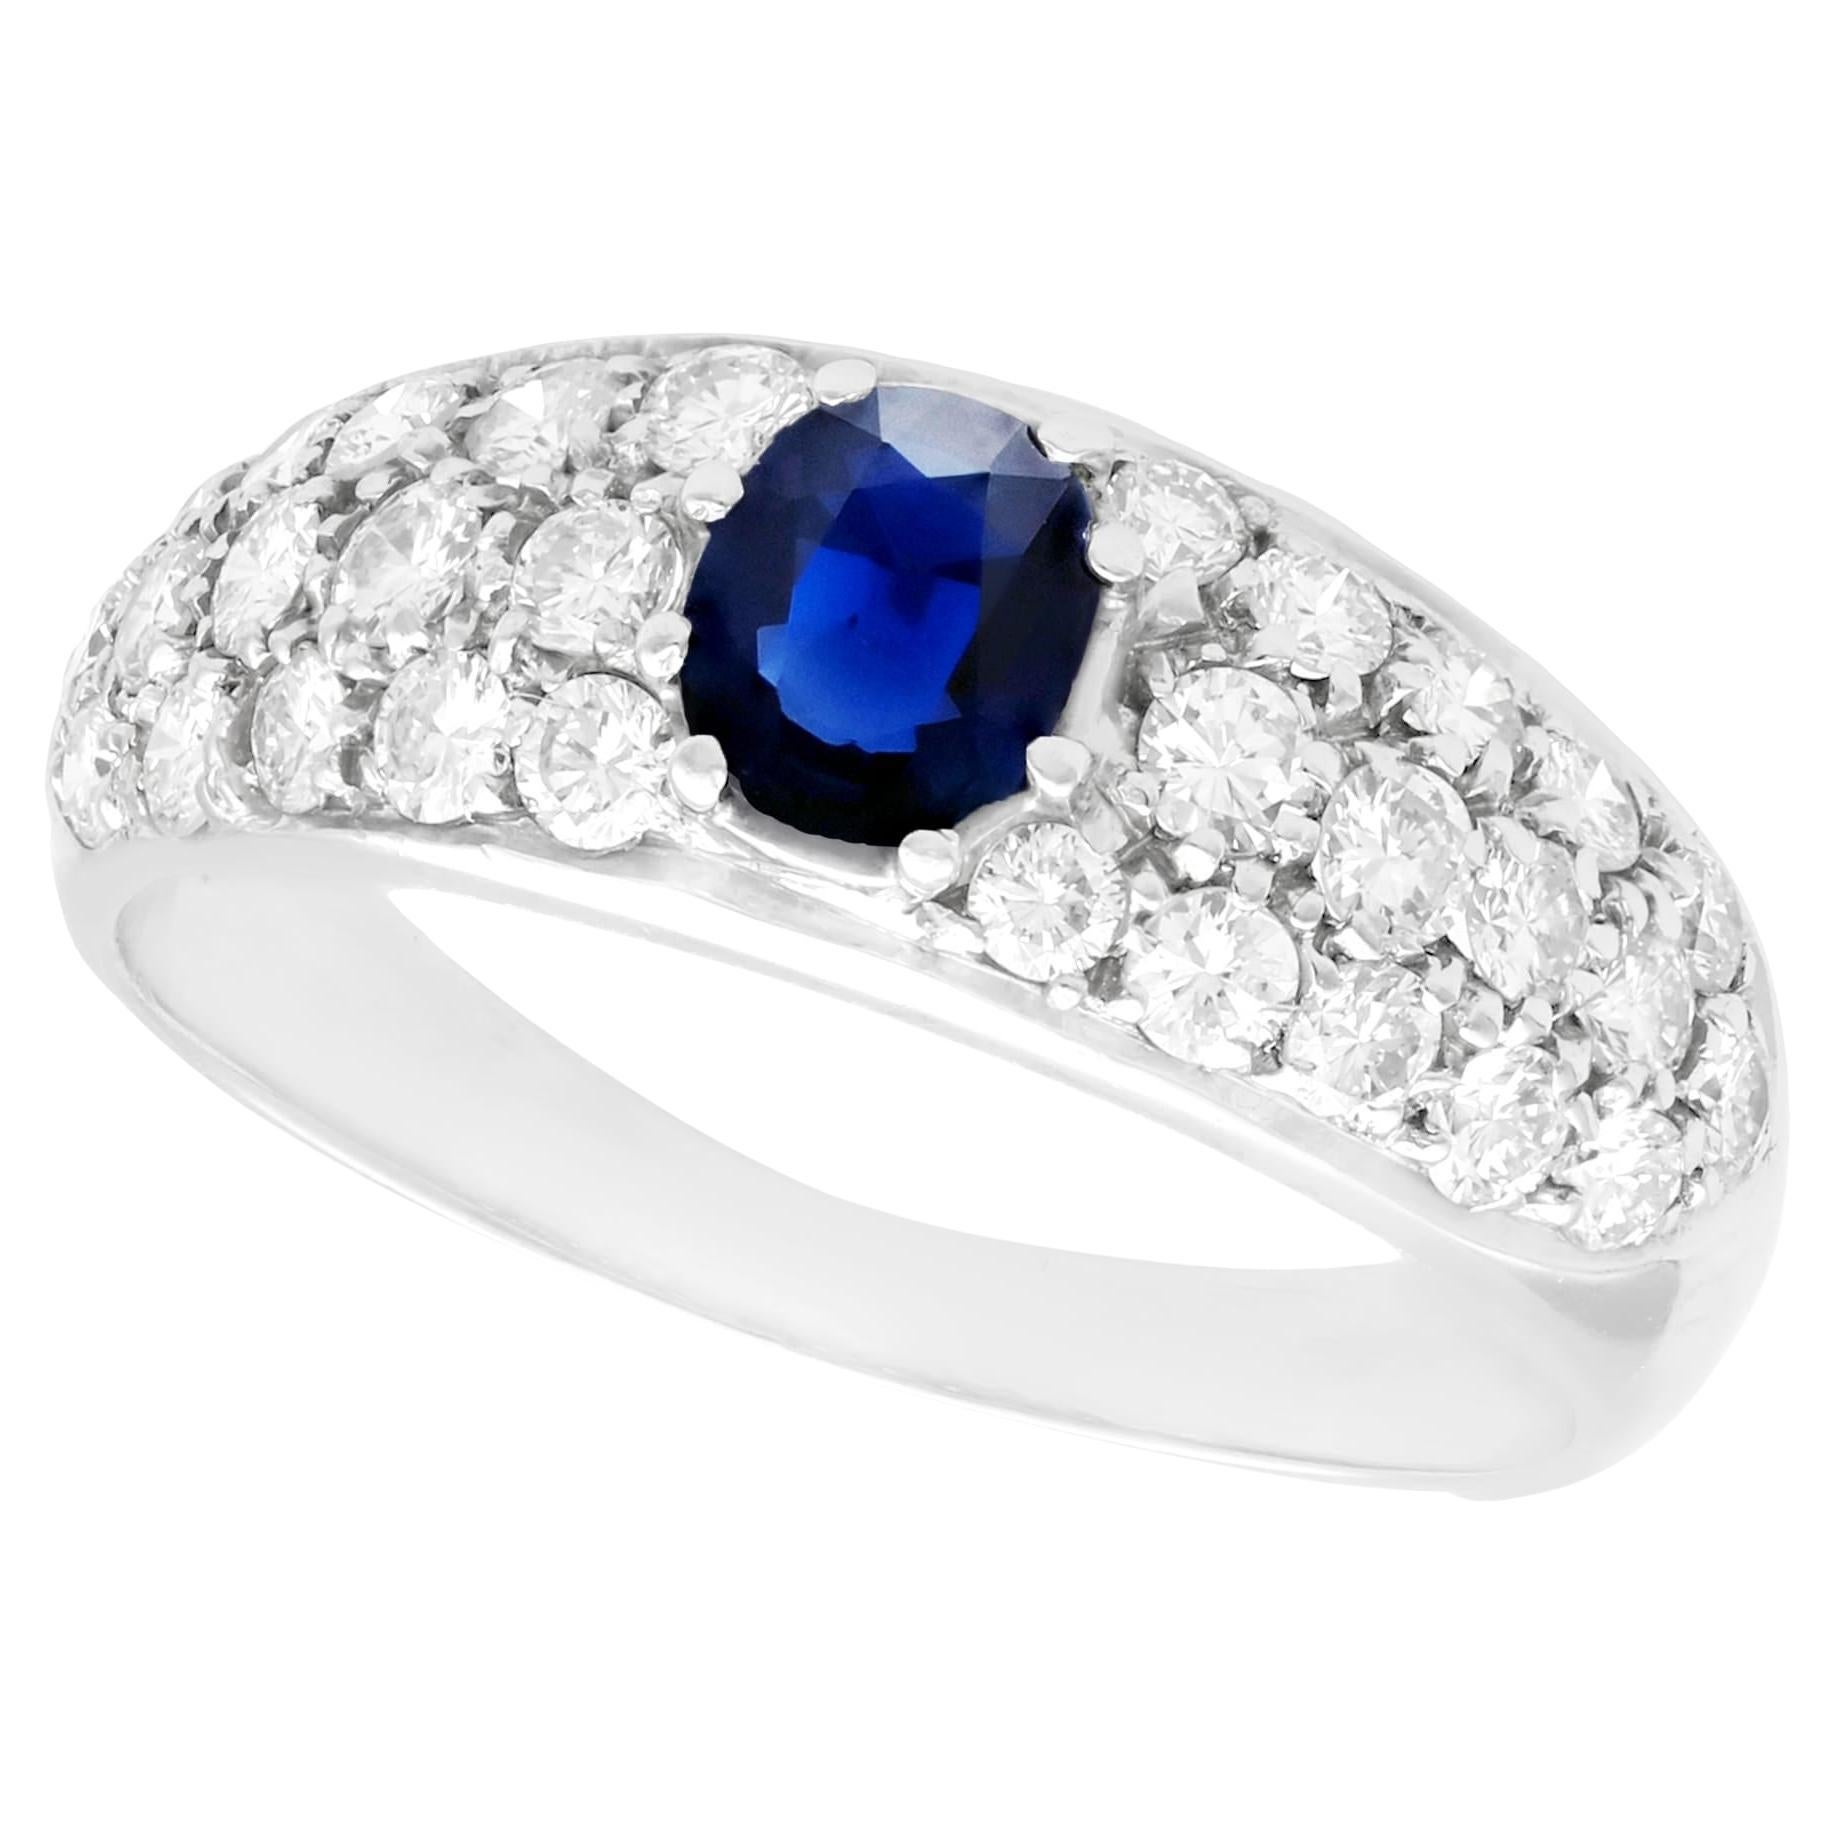 1970s Sapphire 1.95 Carat Diamond and White Gold Engagement Ring For Sale